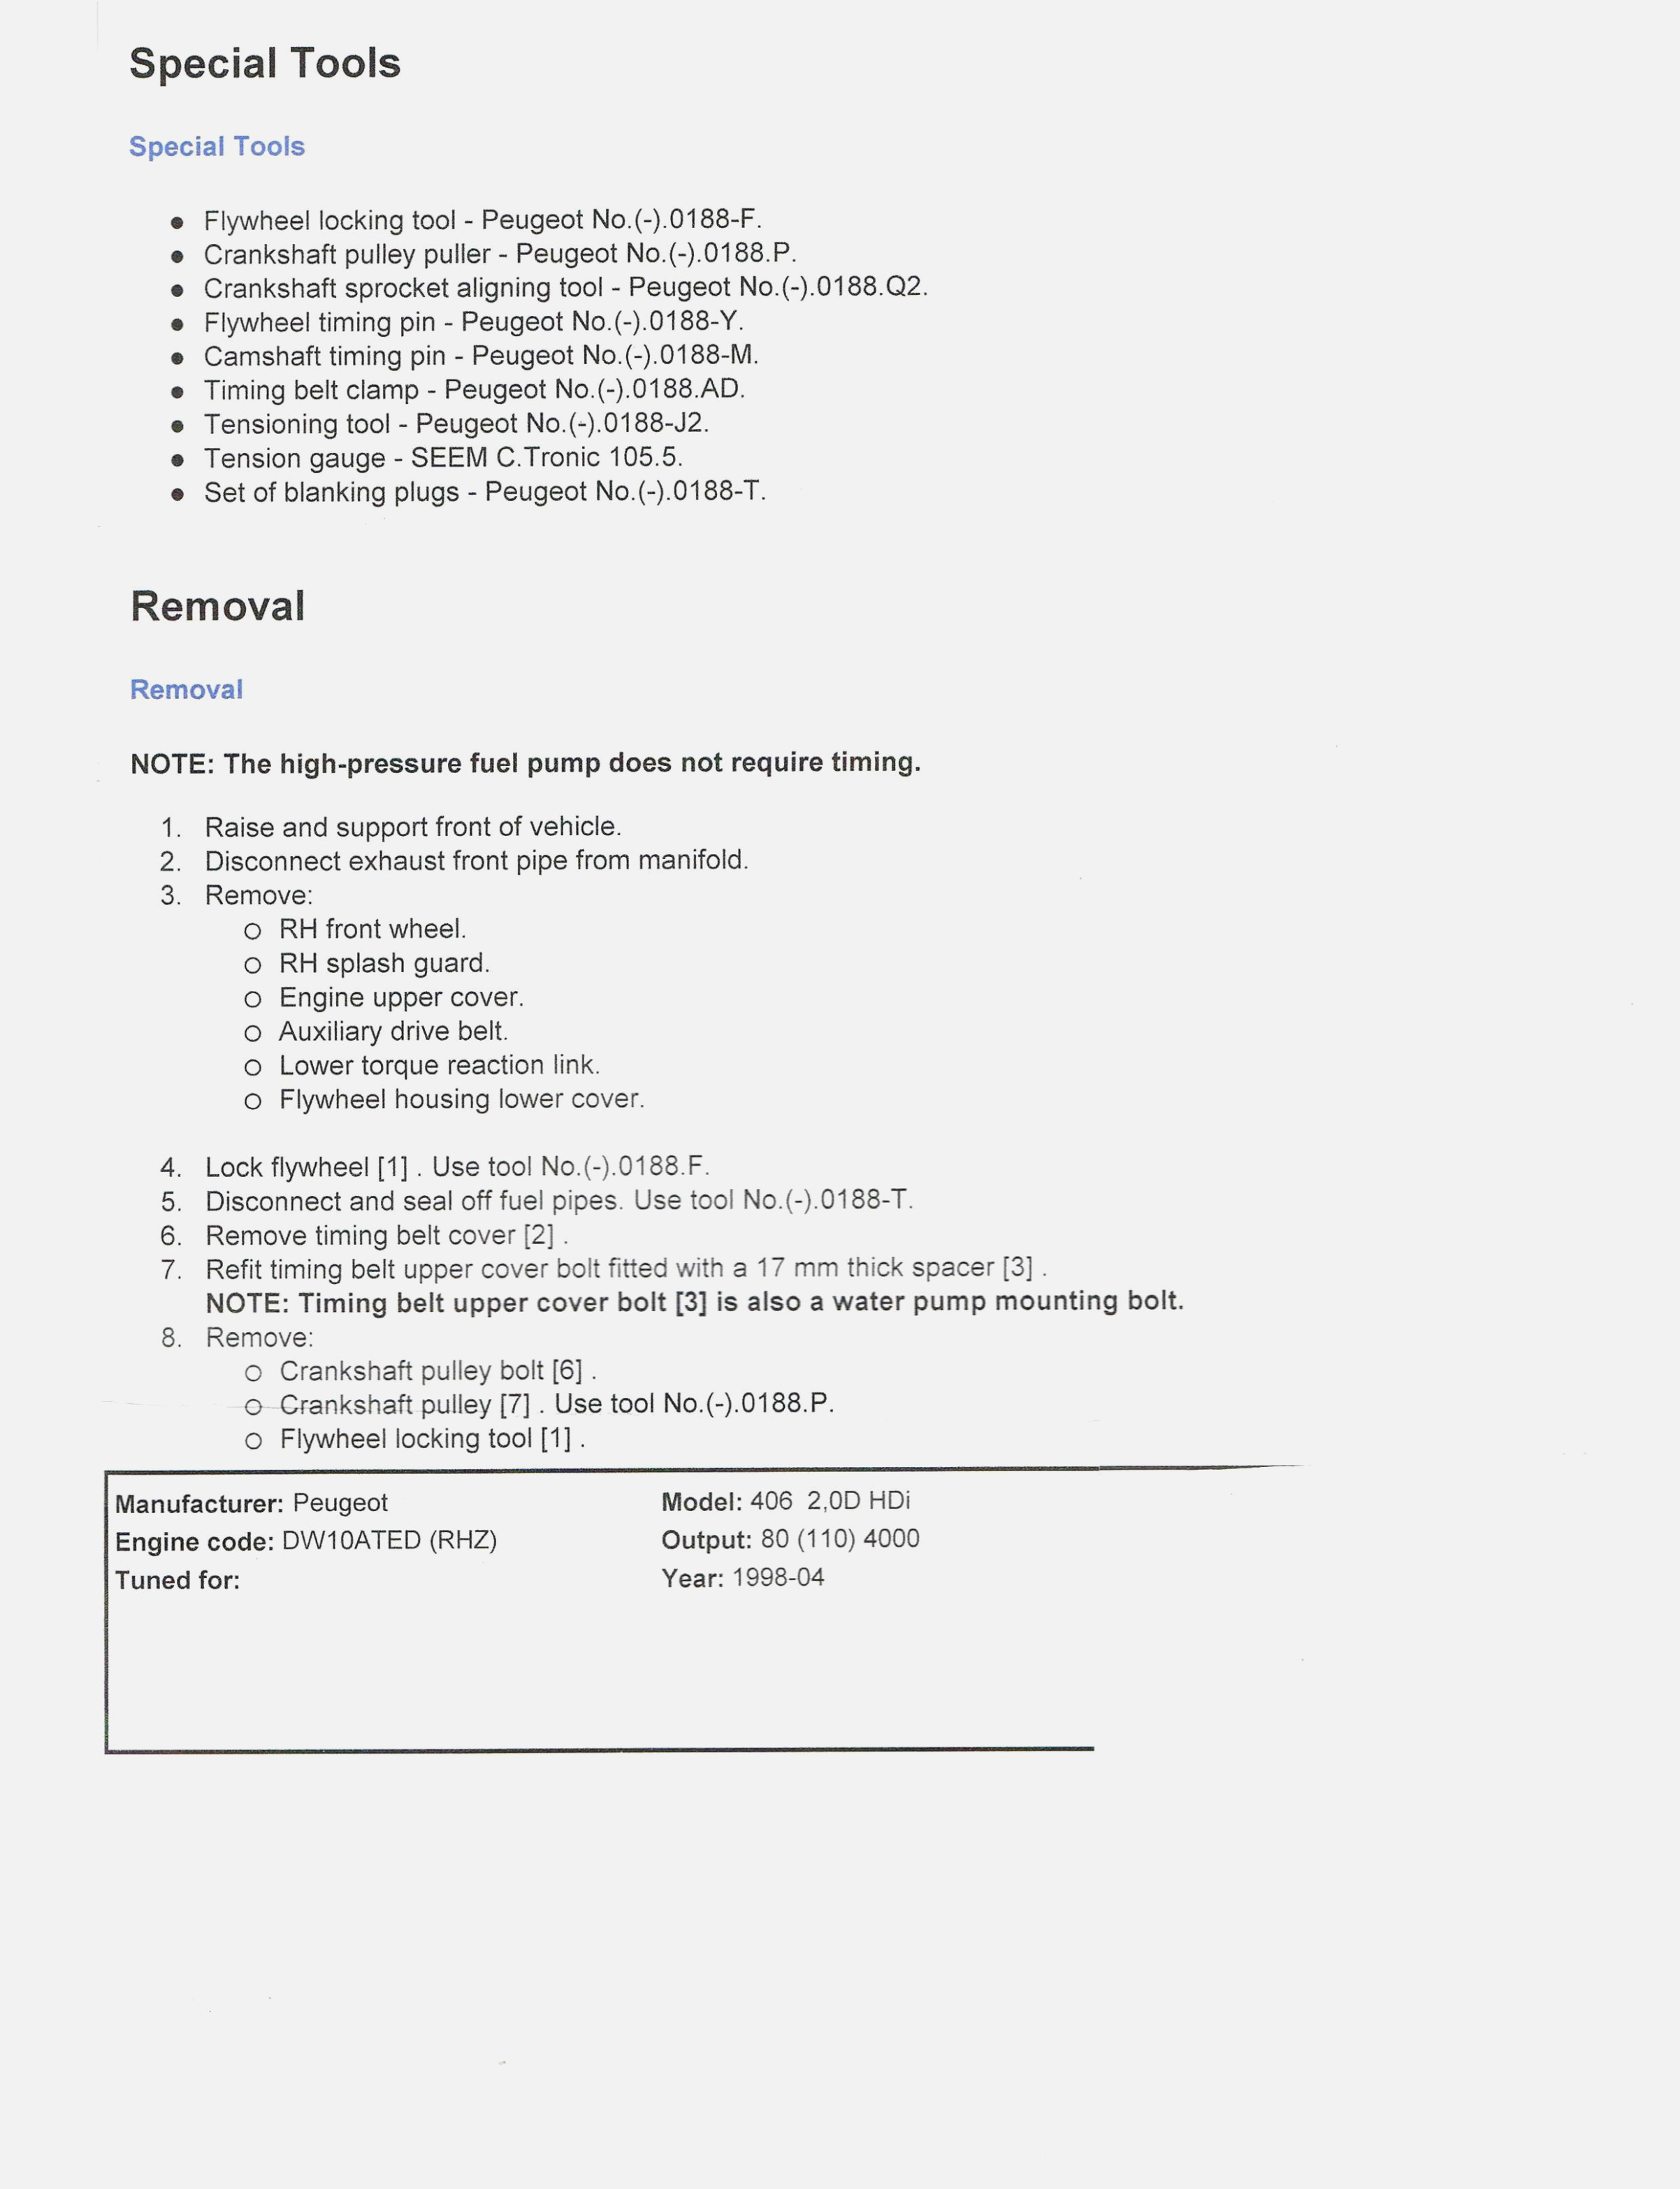 How To Type A Resume How To Type Up A Resume Awesome 15 Creating A Resume In Word Free How To Type Resume In Word how to type a resume|wikiresume.com